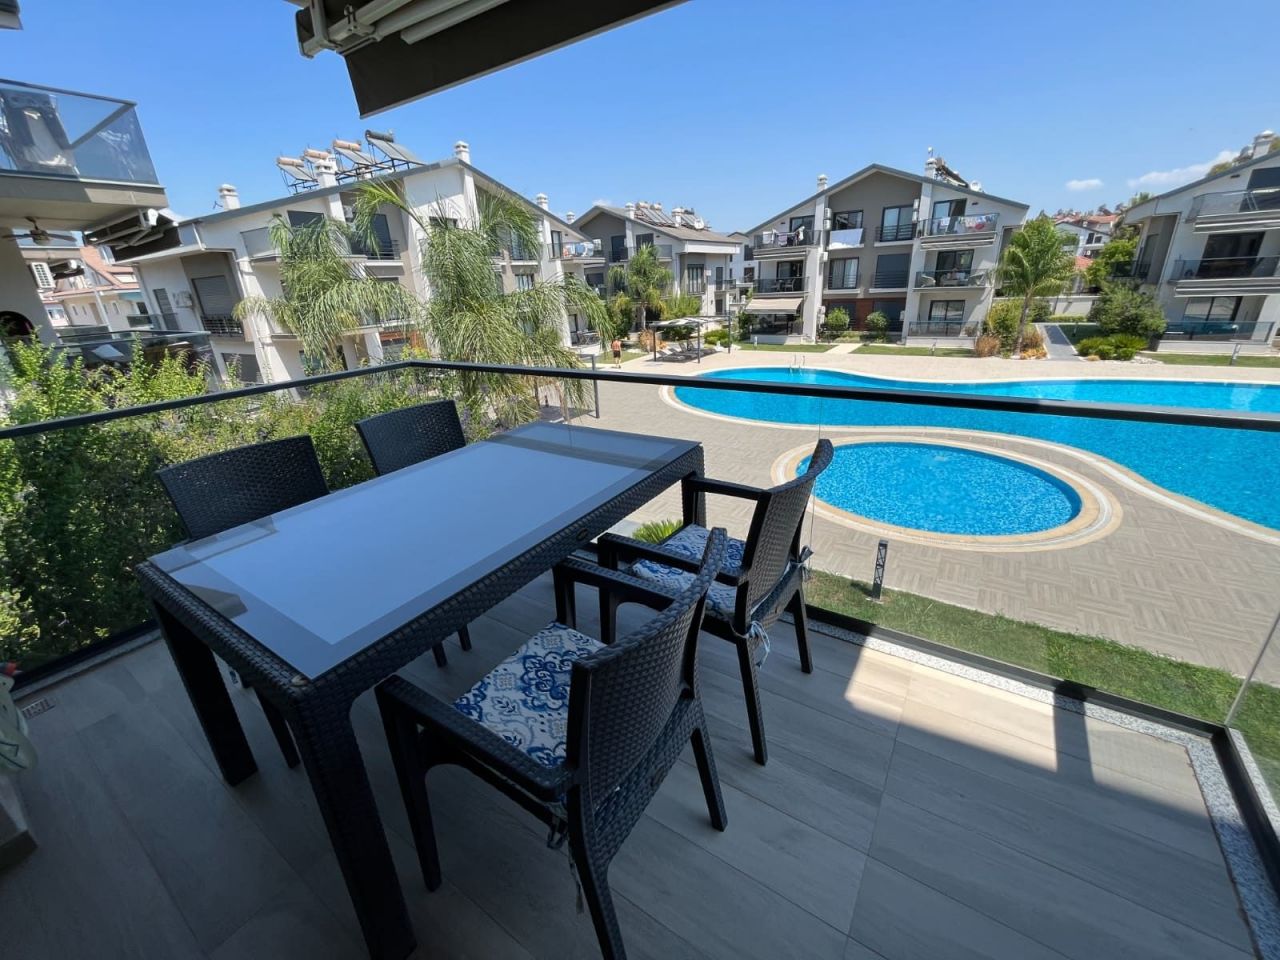 Flat in Fethiye, Turkey, 150 m² - picture 1